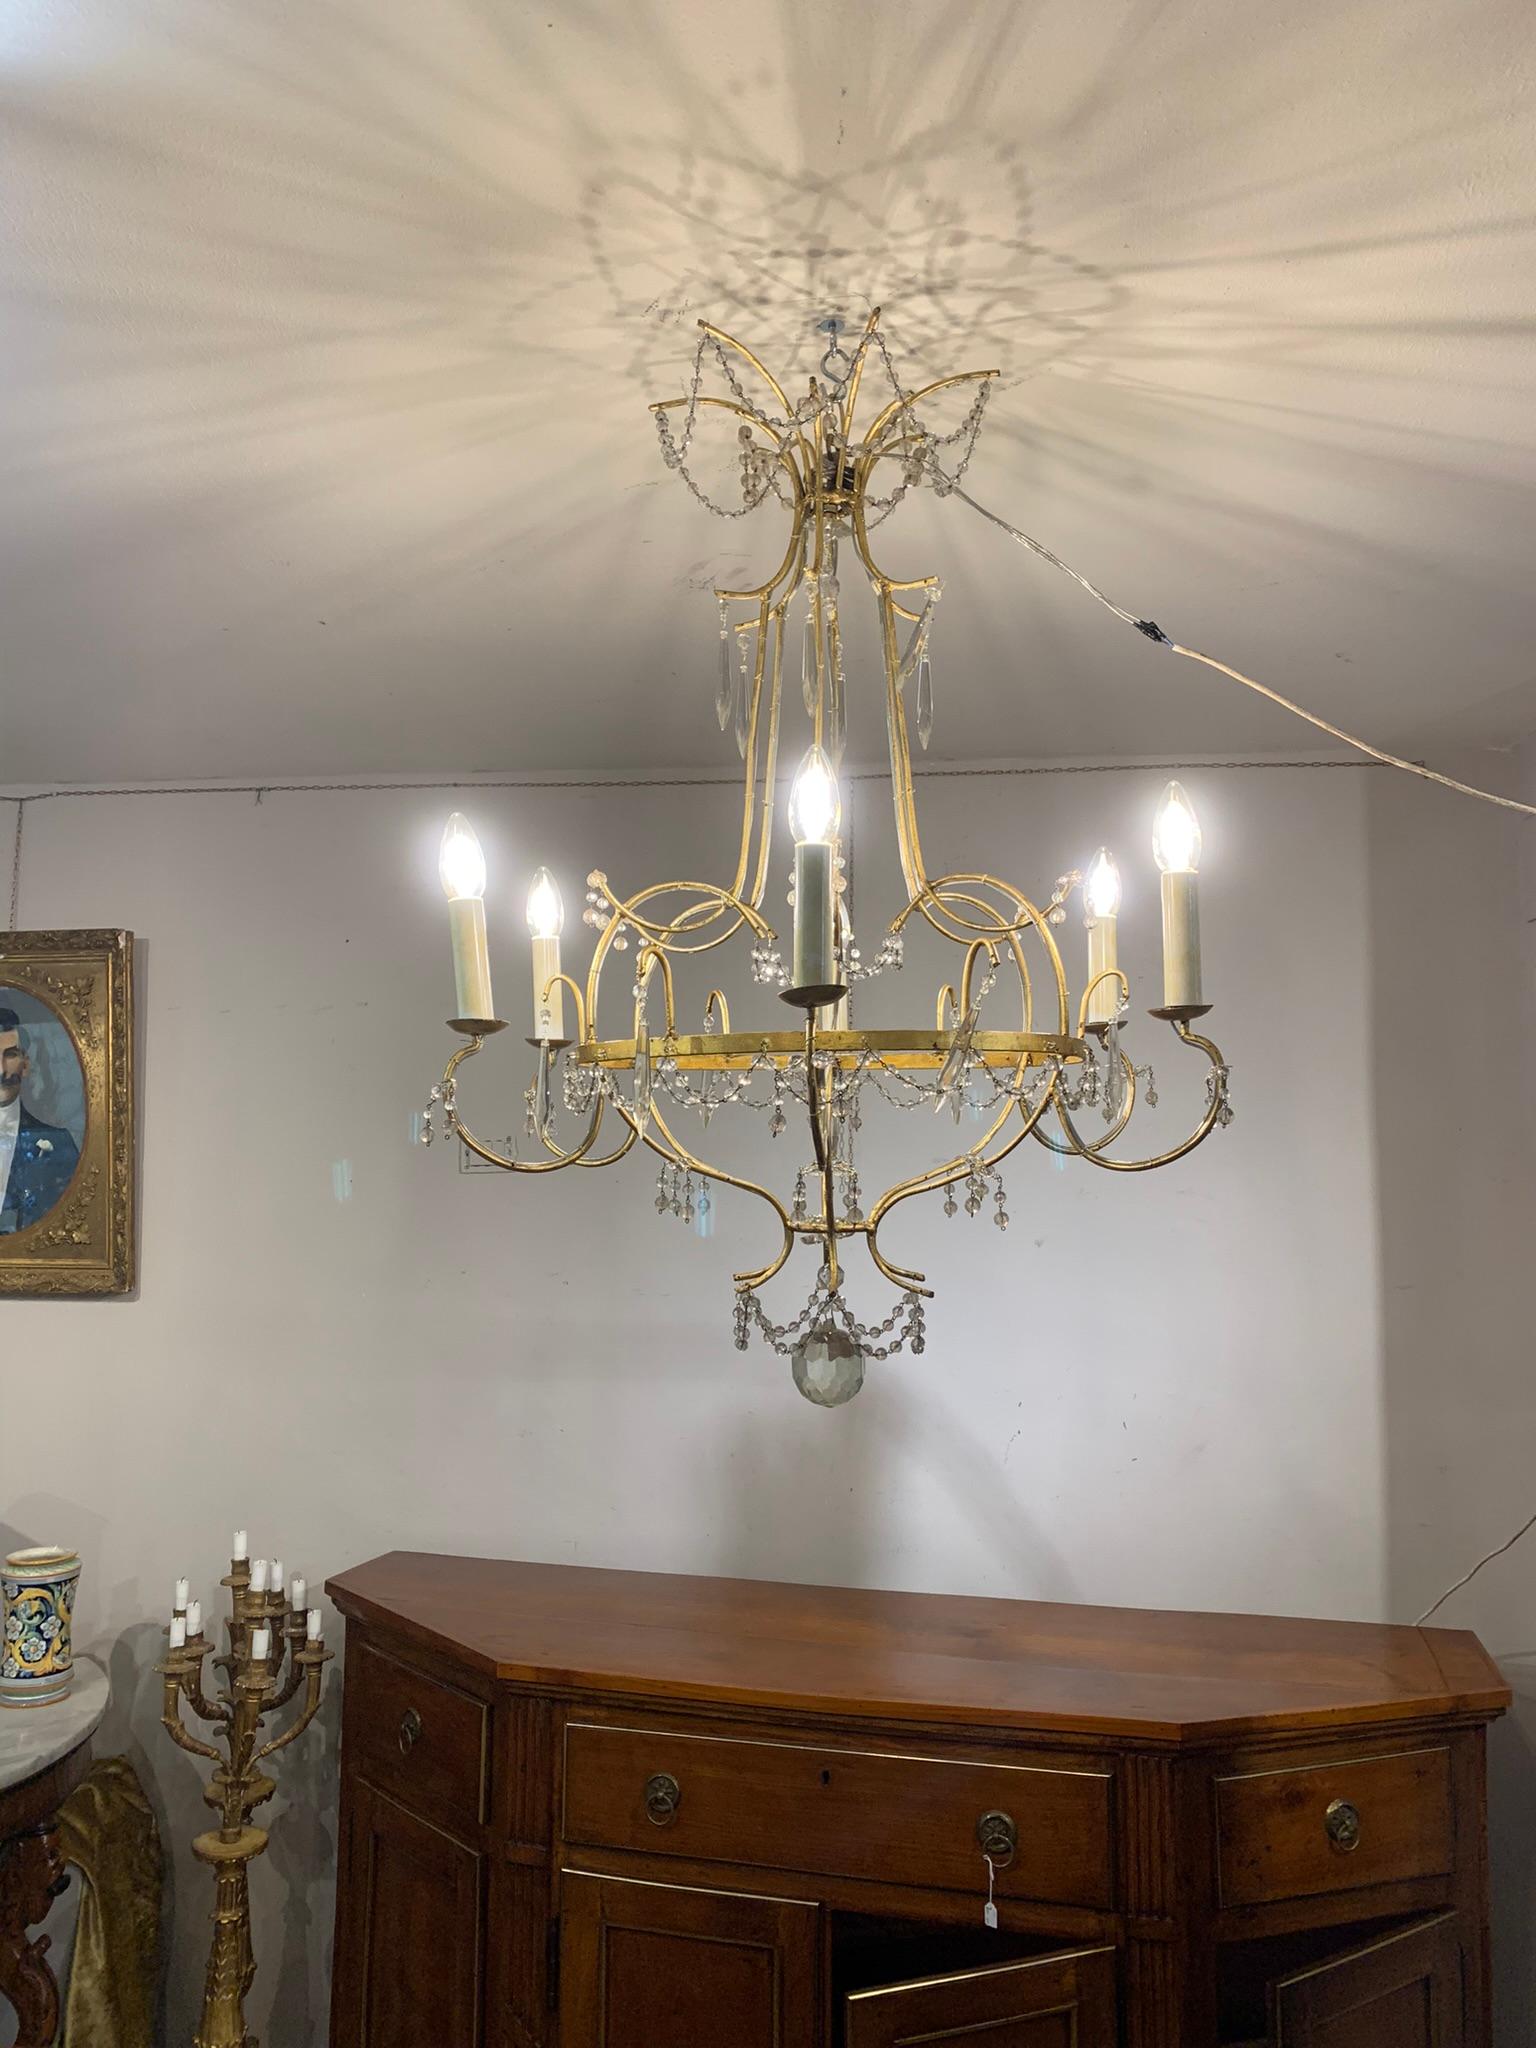 Beautiful Maria Teresa type chandelier, with gilded iron structure, six candle holder arms and crystal pendants. The quality of this chandelier lies in its lightness and small size, making it suitable for smaller rooms while still remaining